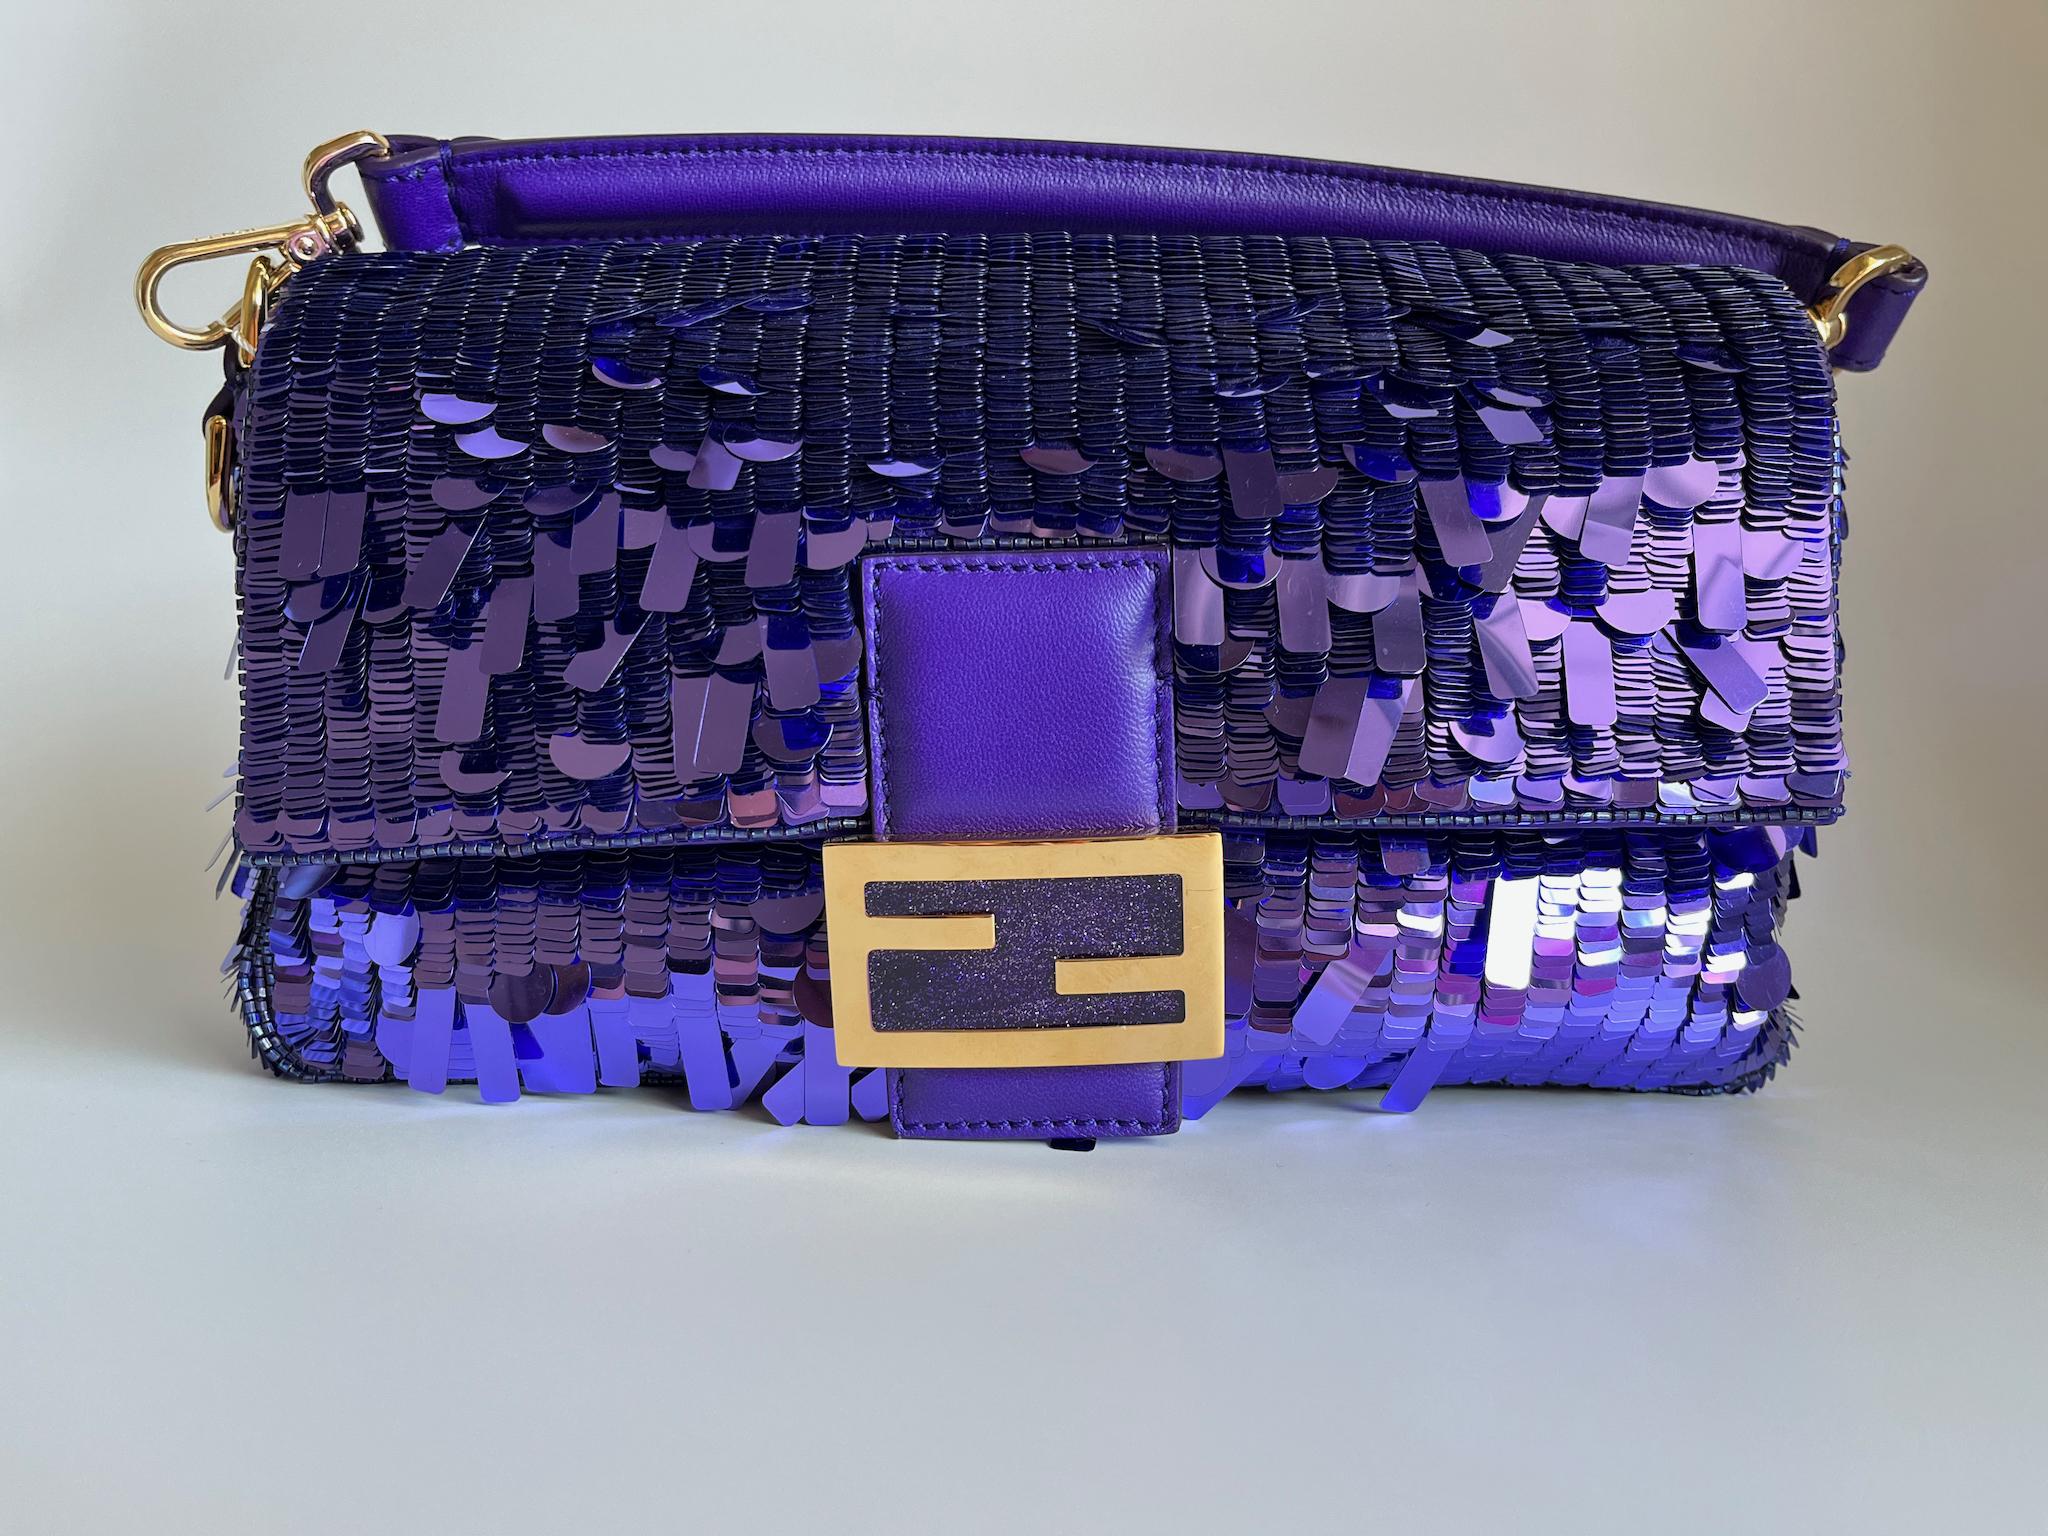 A bag that needs no introduction. Sex and City Fendi Baguette in purple sequins. Comes with strap, card, dustbag, spare sequins.

Never worn
Model: Fendi Baguette
Color: Purple
Outer Material: Sequins
Inner Material: Yellow Satin lining
Strap Color: